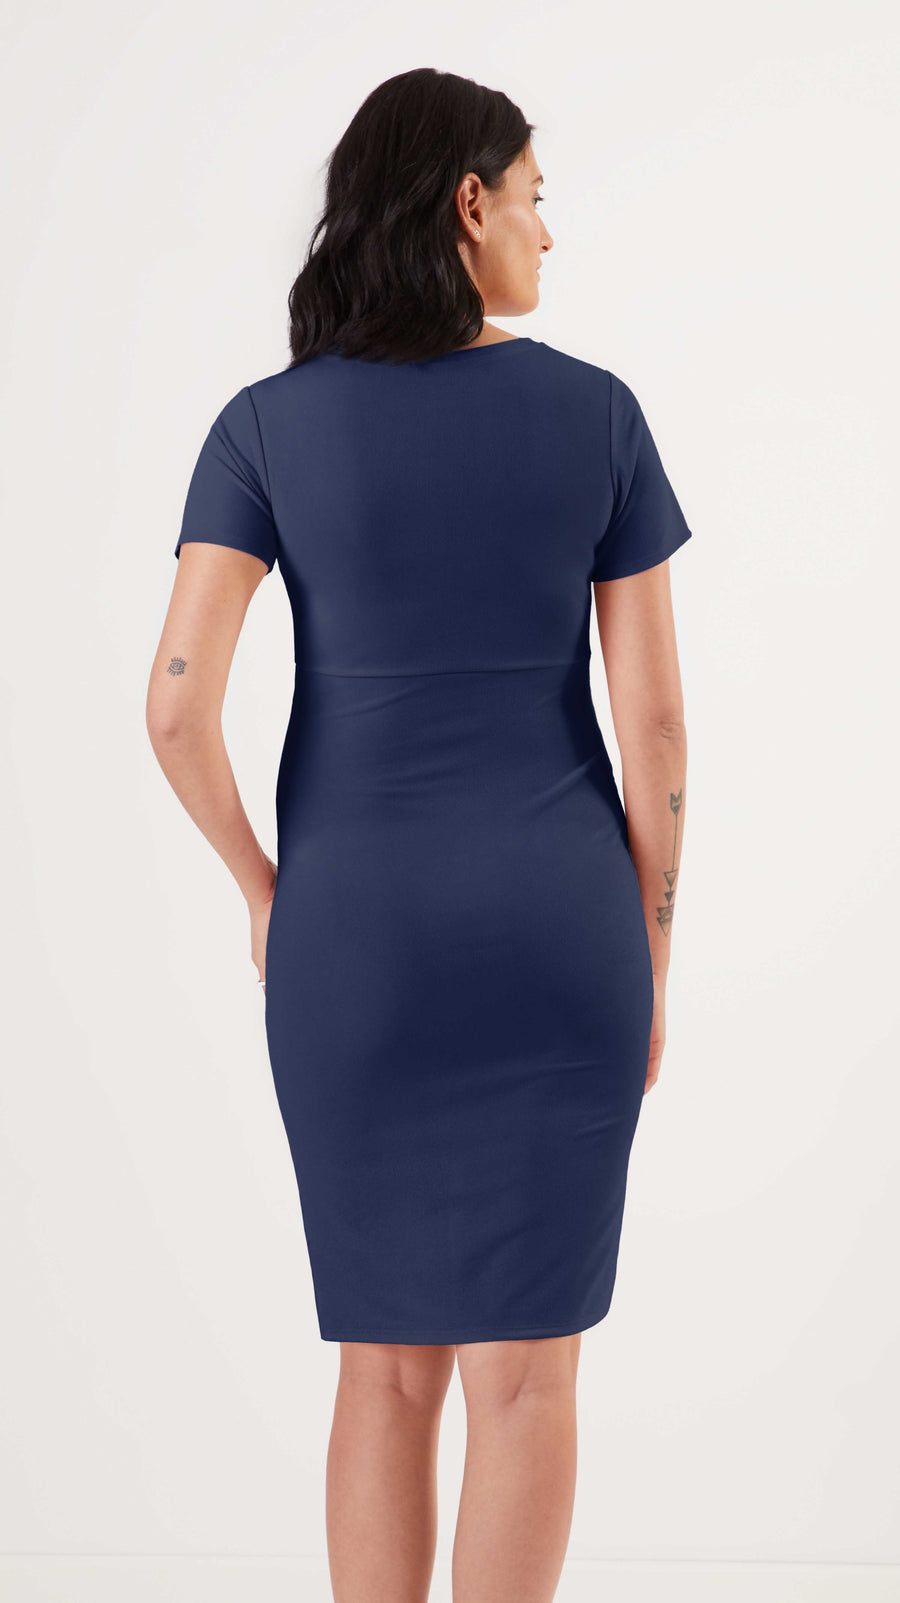 Stowaway Collection Becca Maternity Dress in Navy Front View